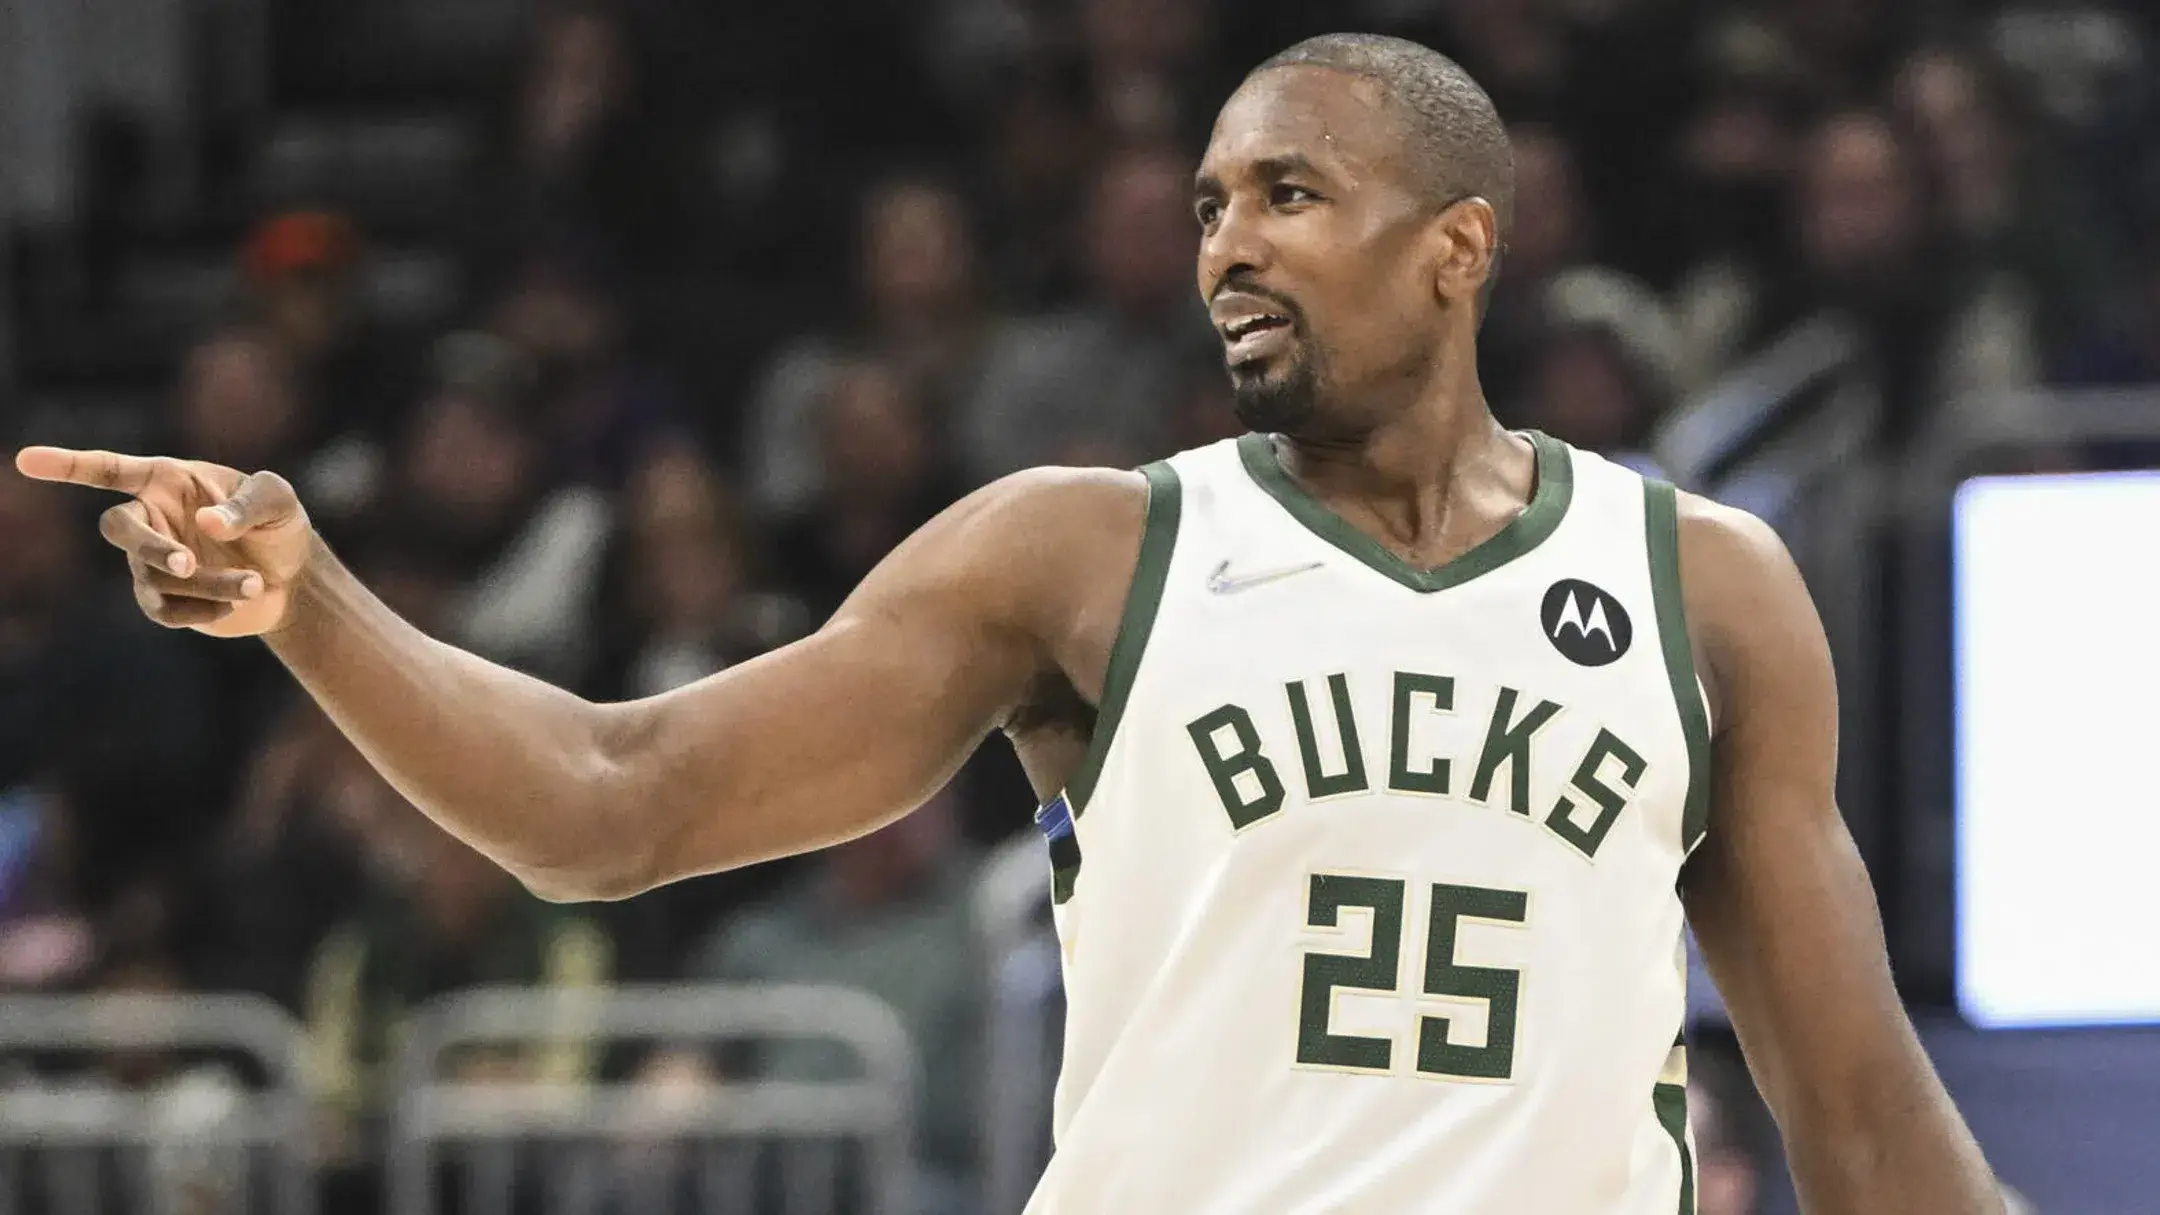 Ibaka is the cover of Real Madrid: Tavares points to the NBA
	

